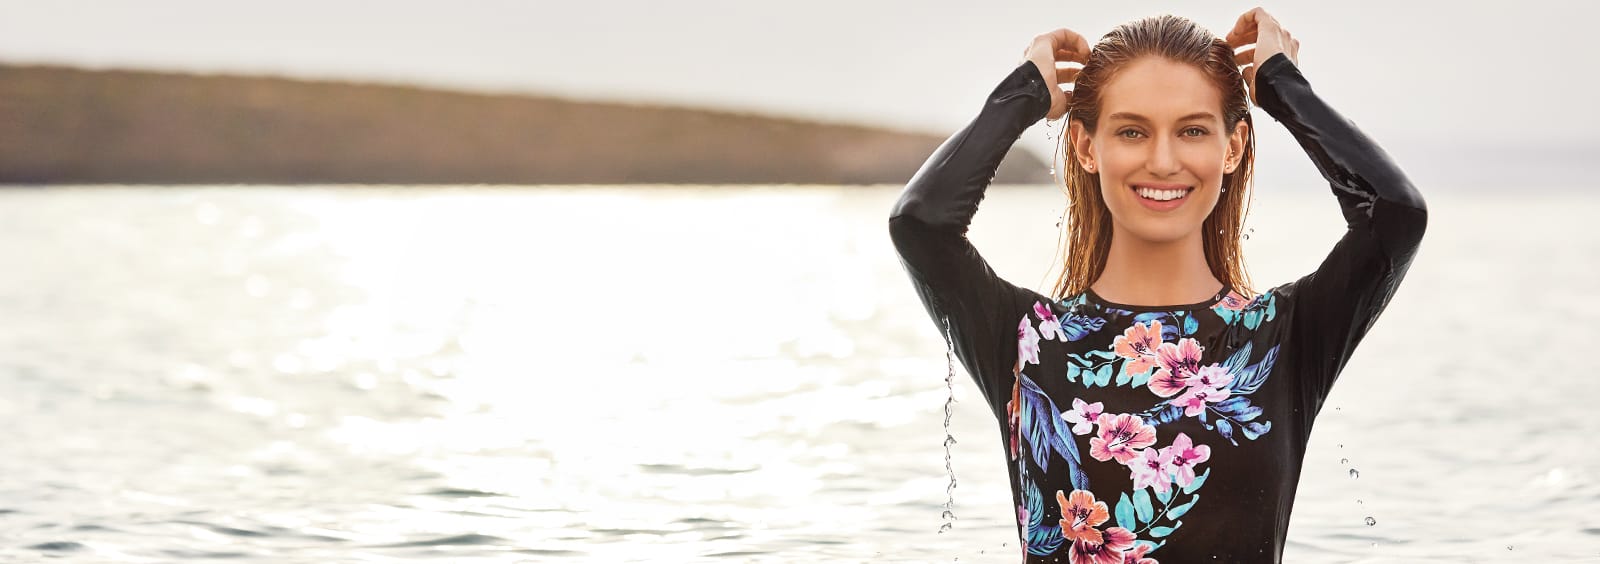 Swimming with a rash guard | Lands' End